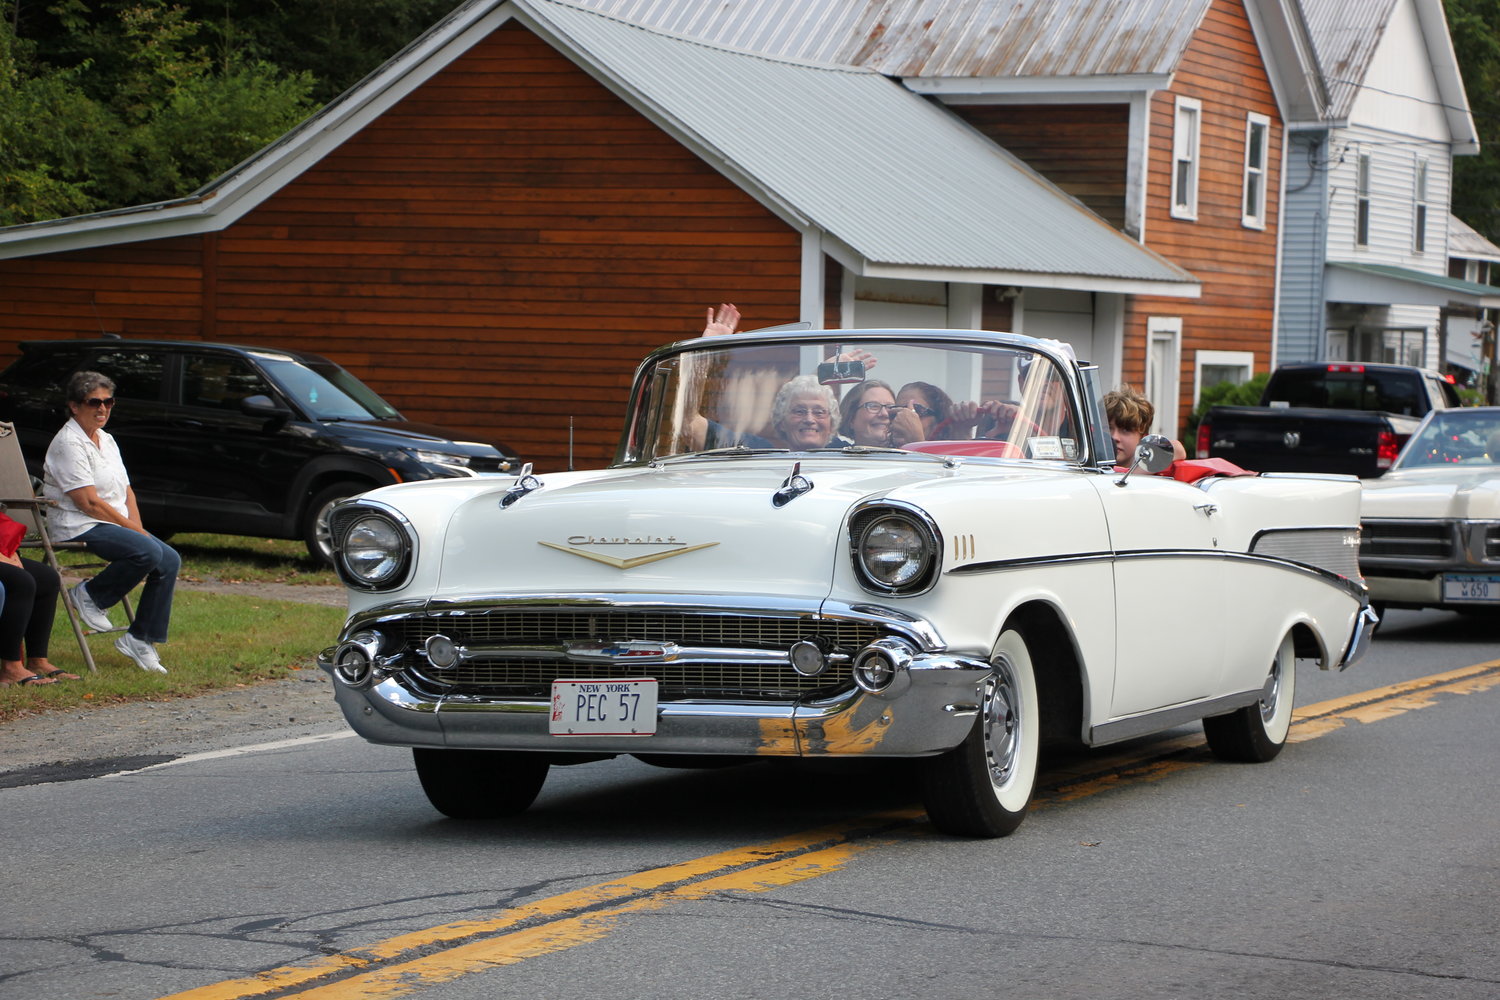 Some of the members of the Grahamsville Fire Department’s Ladies Auxiliary arrived in style.